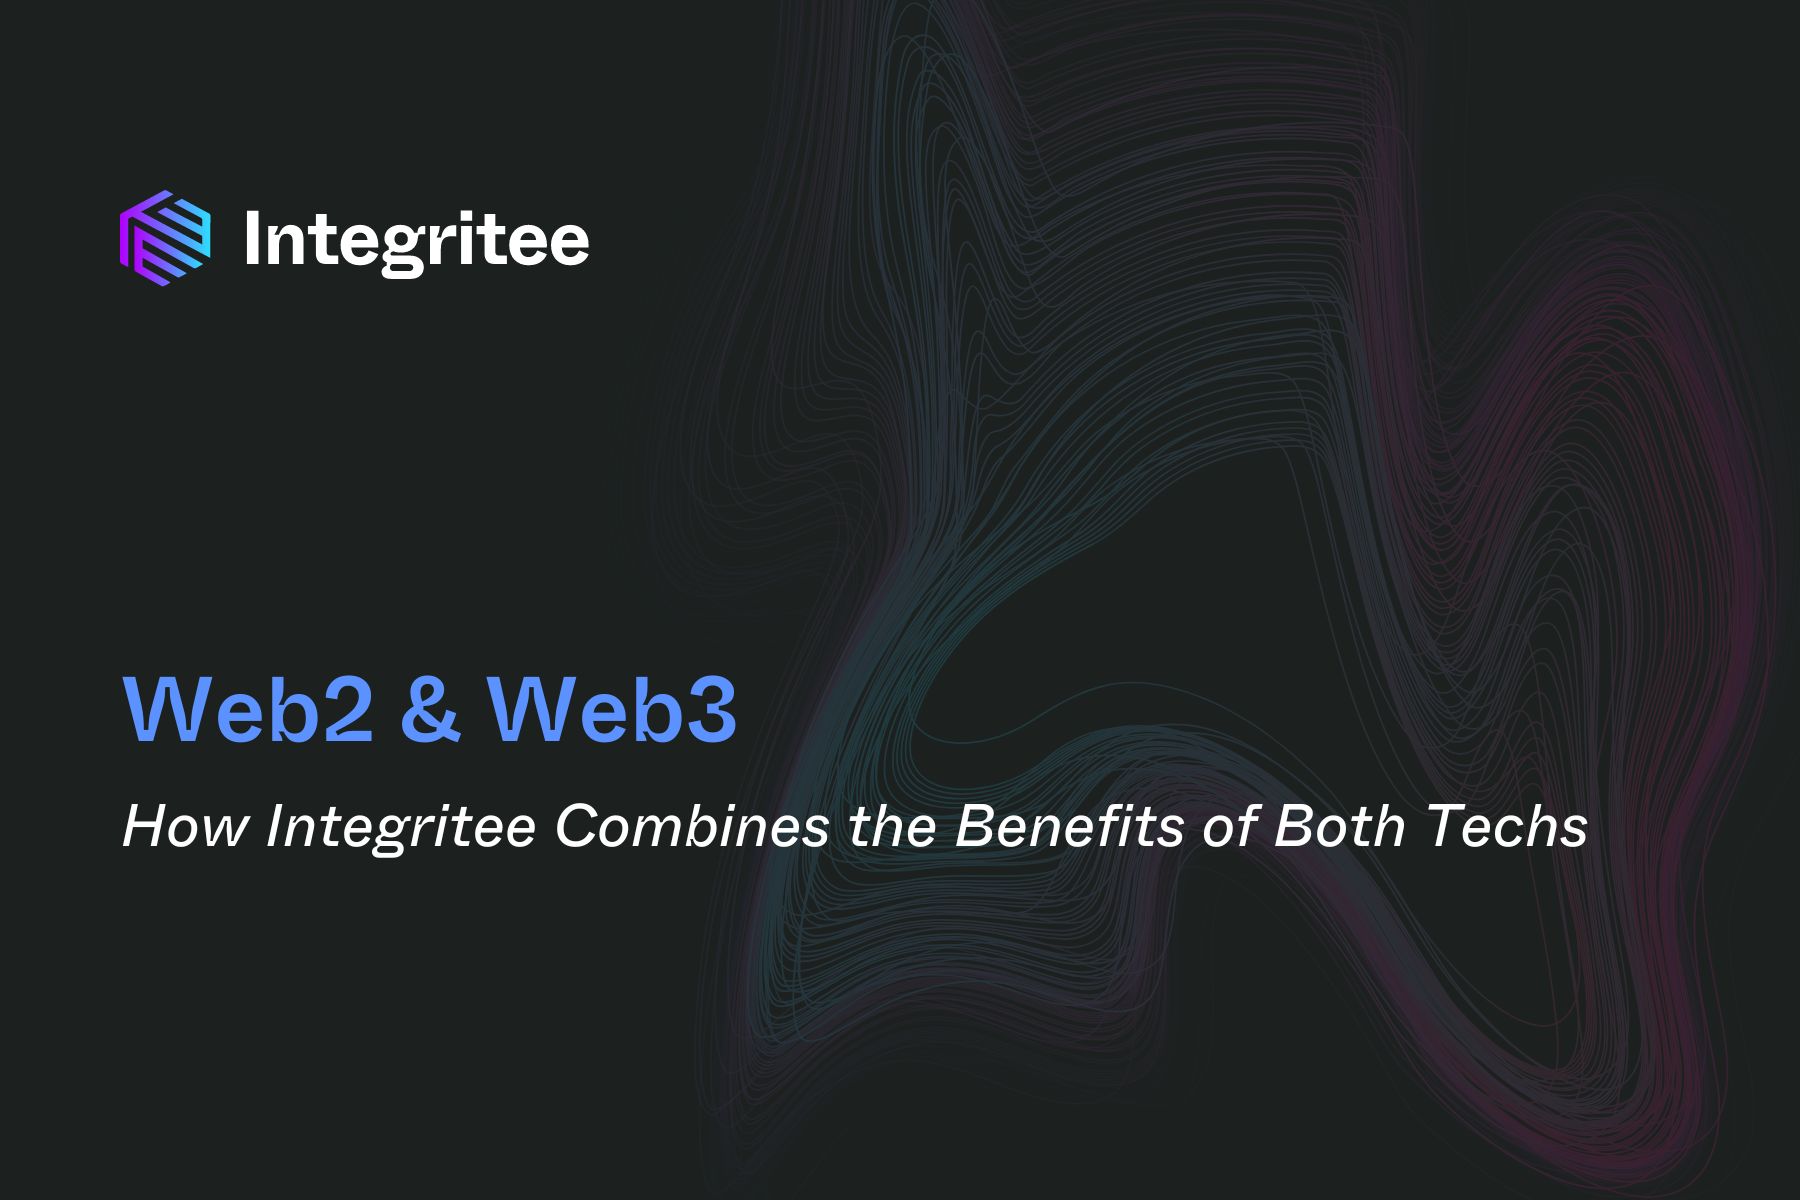 How Integritee combines the benefits of Web2 and Web3 technologies